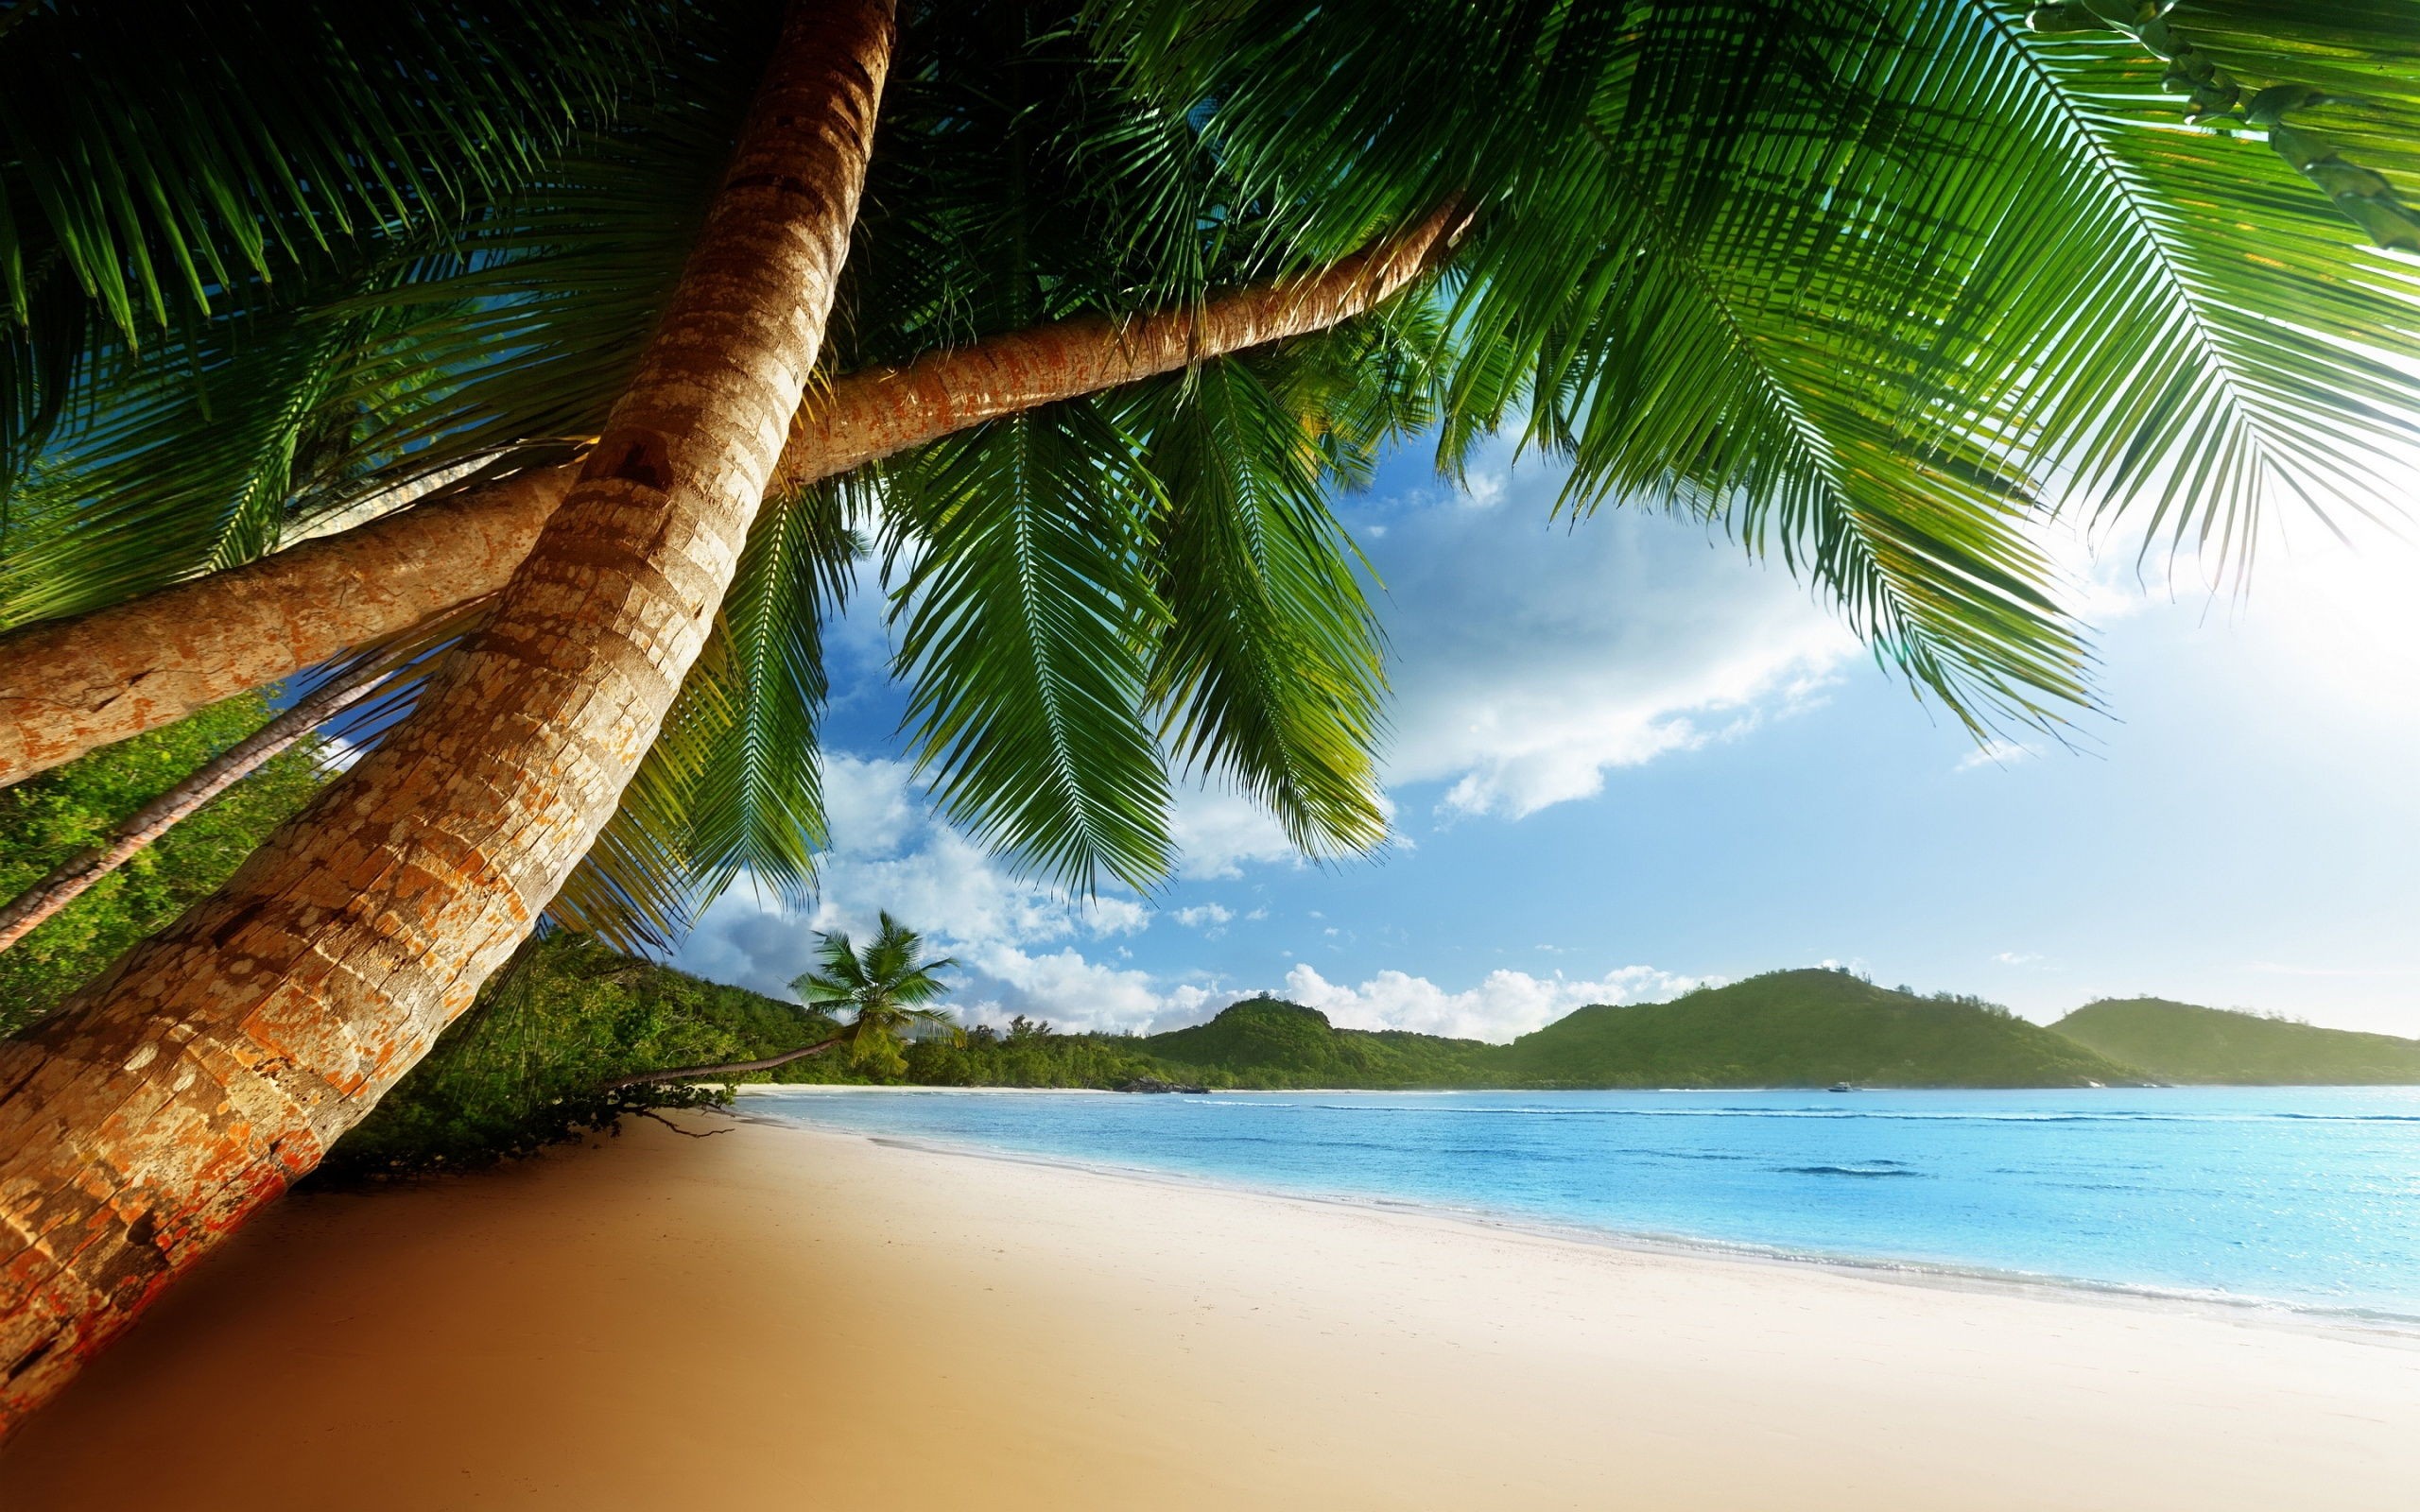 Awesome Caribbean Backgrounpictures New Best H Wallpaper Of